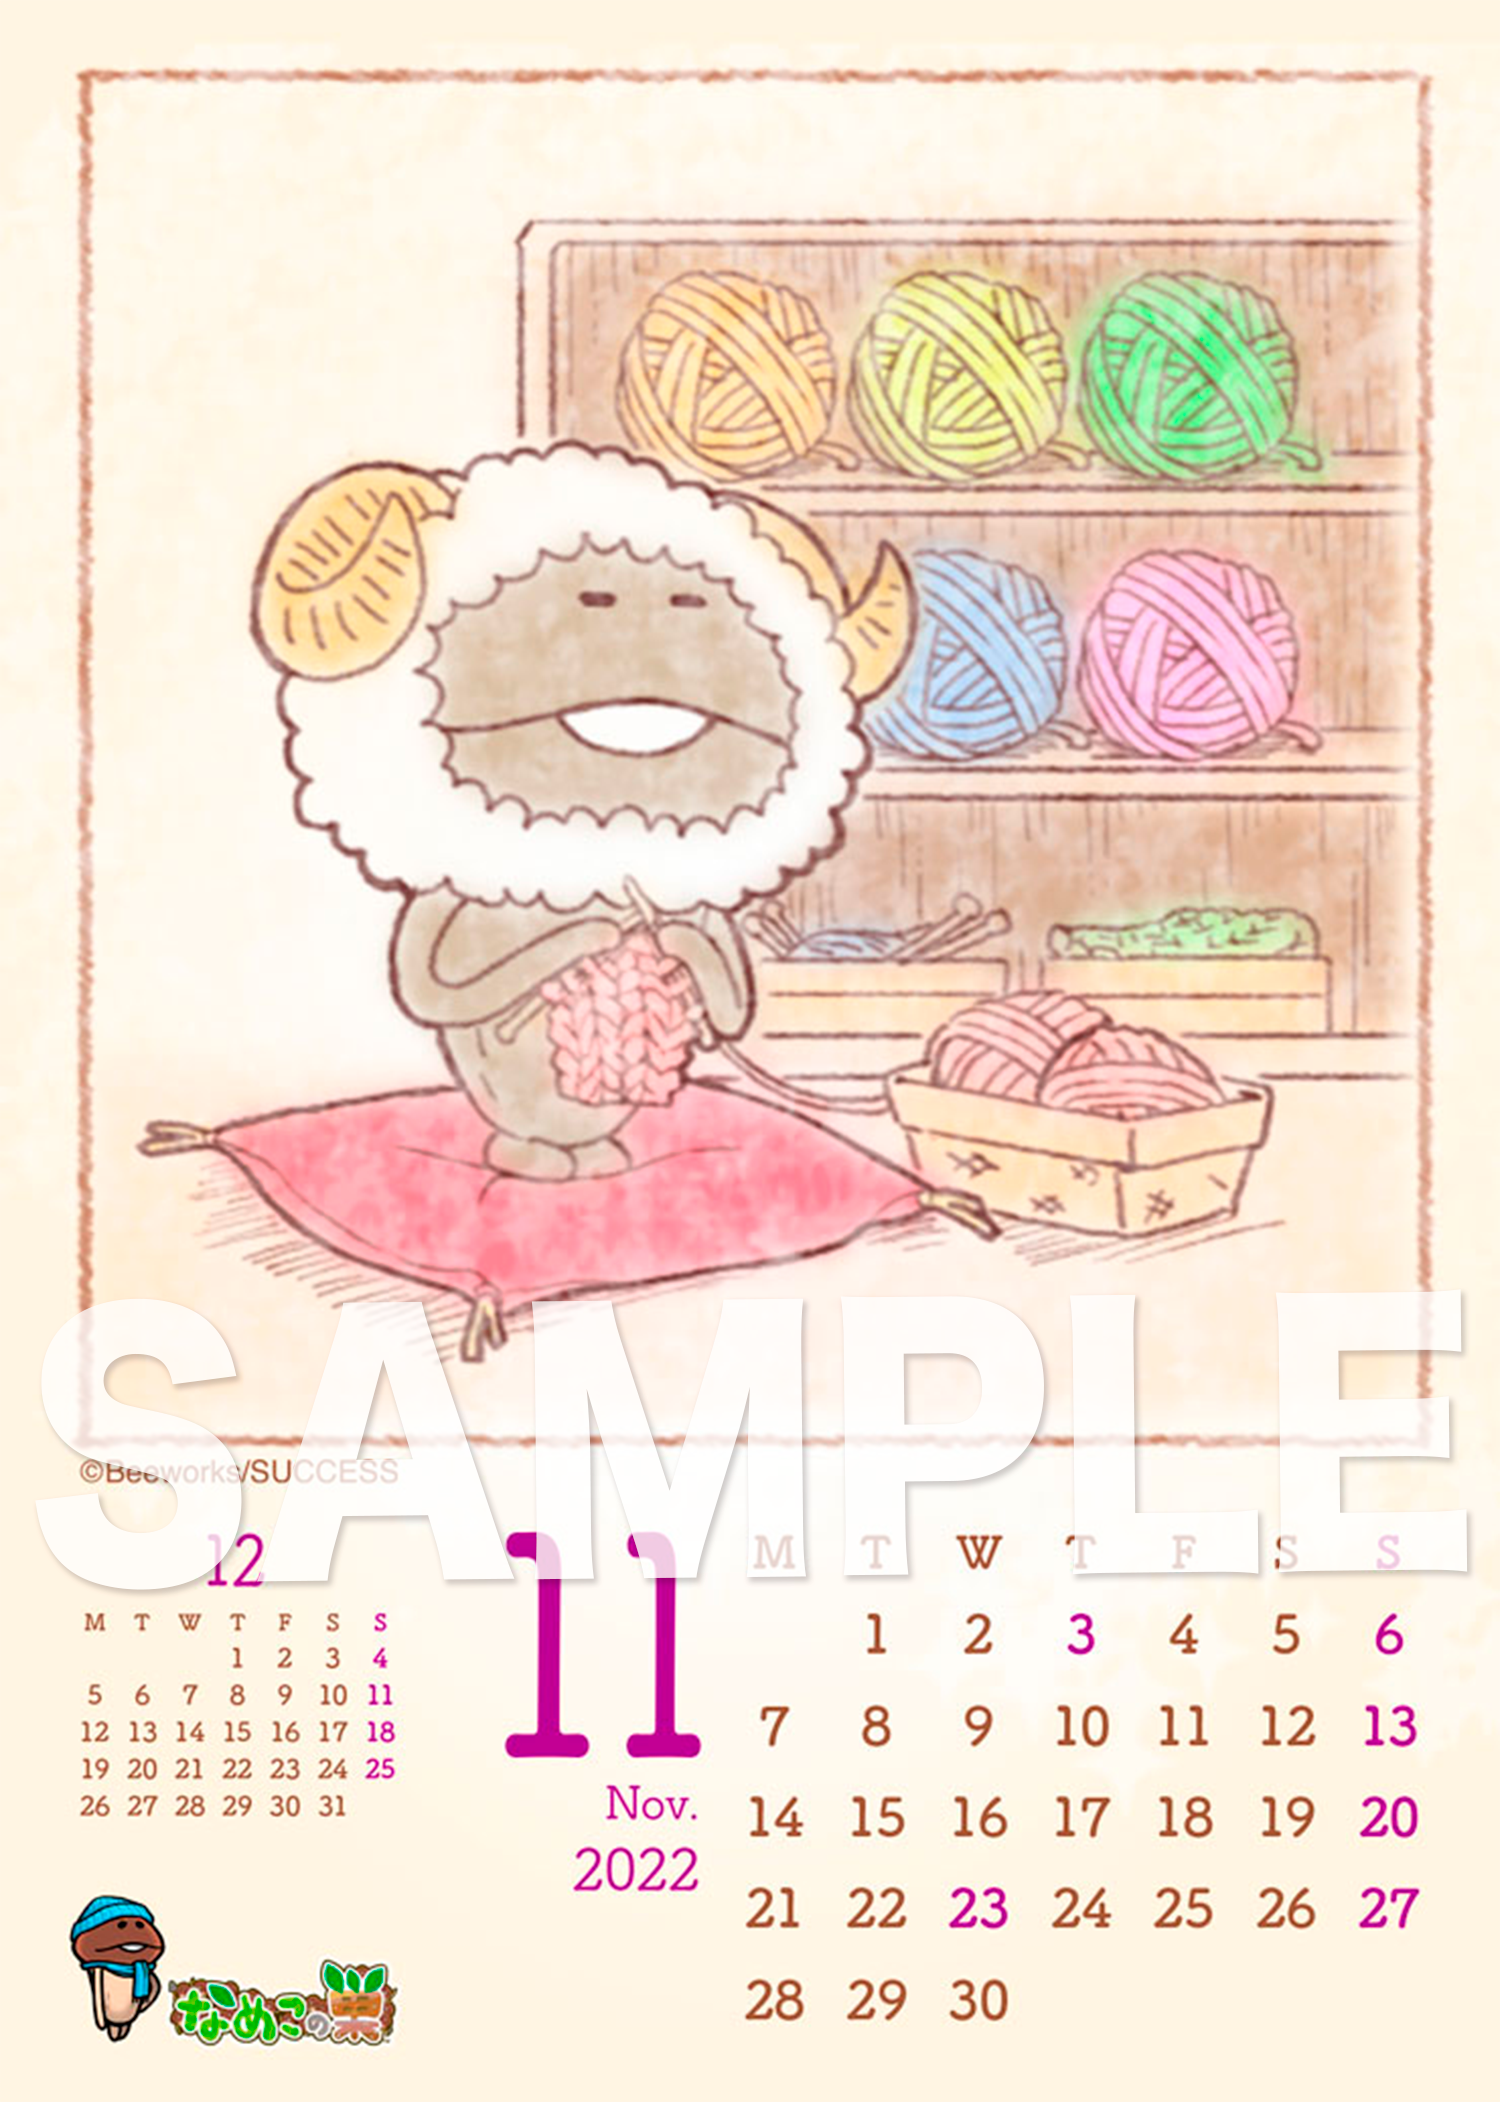 nameko_fancolle_2211_a.png